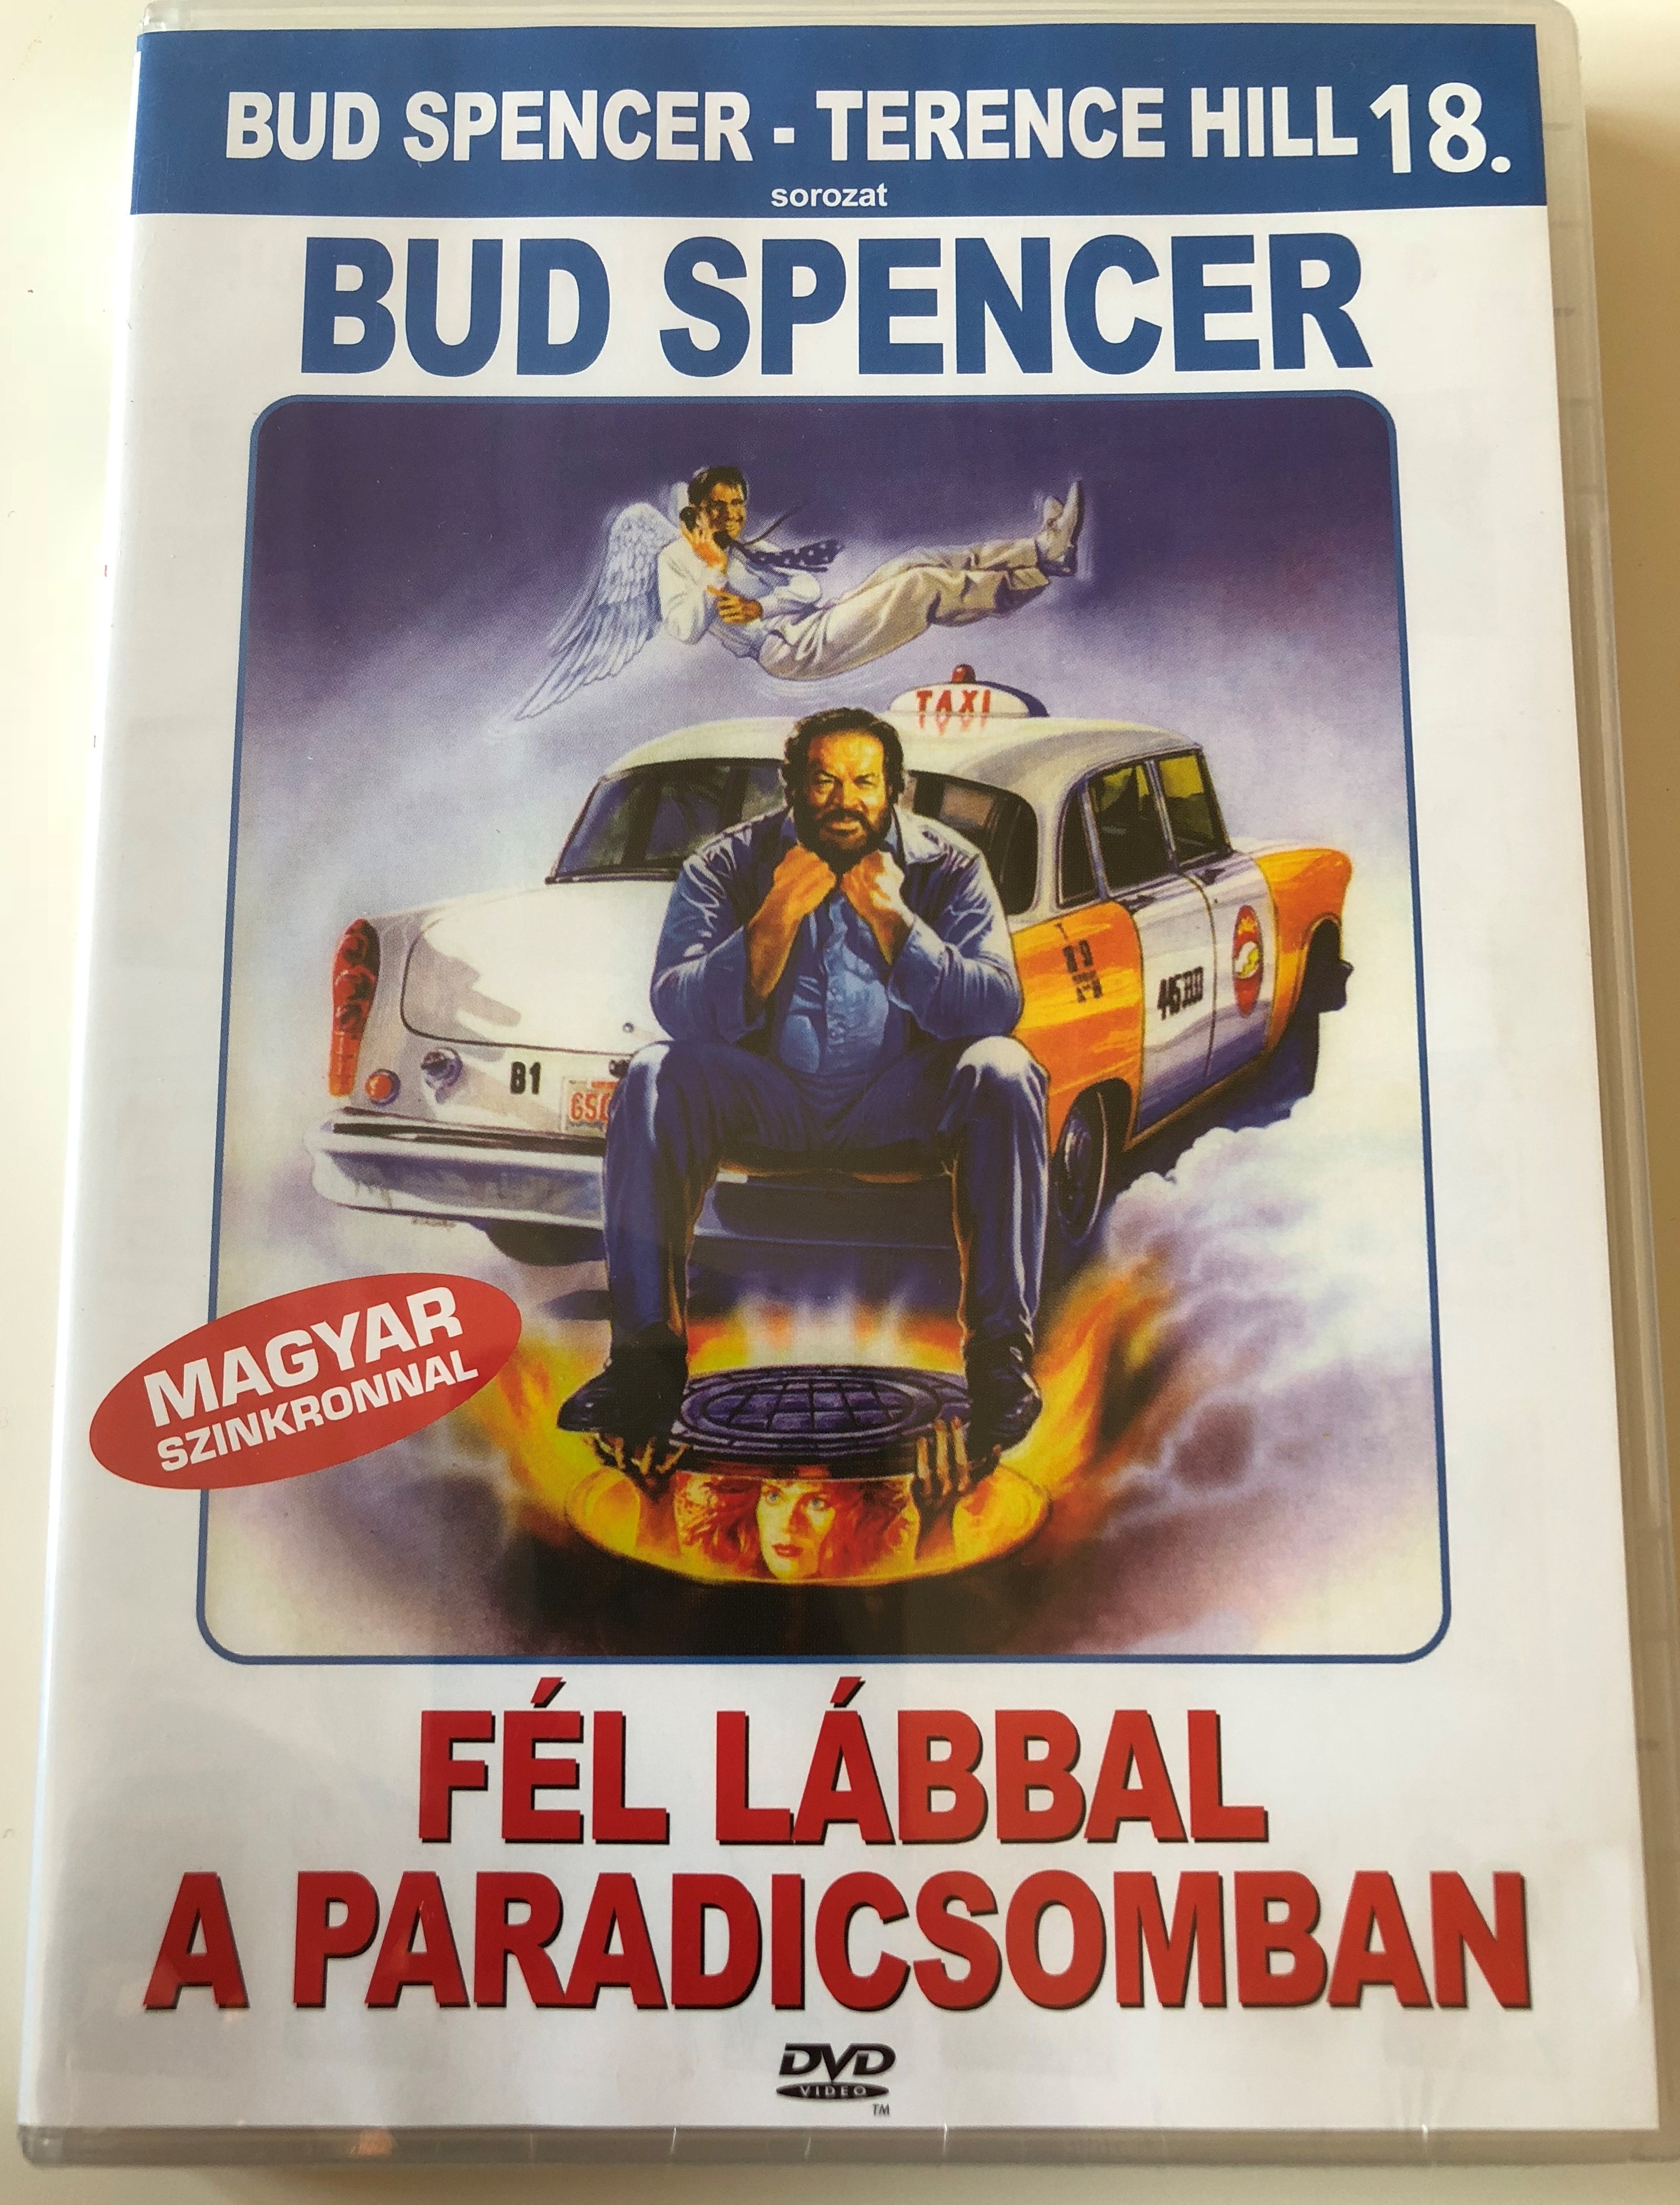 f-l-l-bbal-a-paradicsomban-dvd-1990-un-piede-in-paradiso-speaking-of-the-devil-1-.jpg